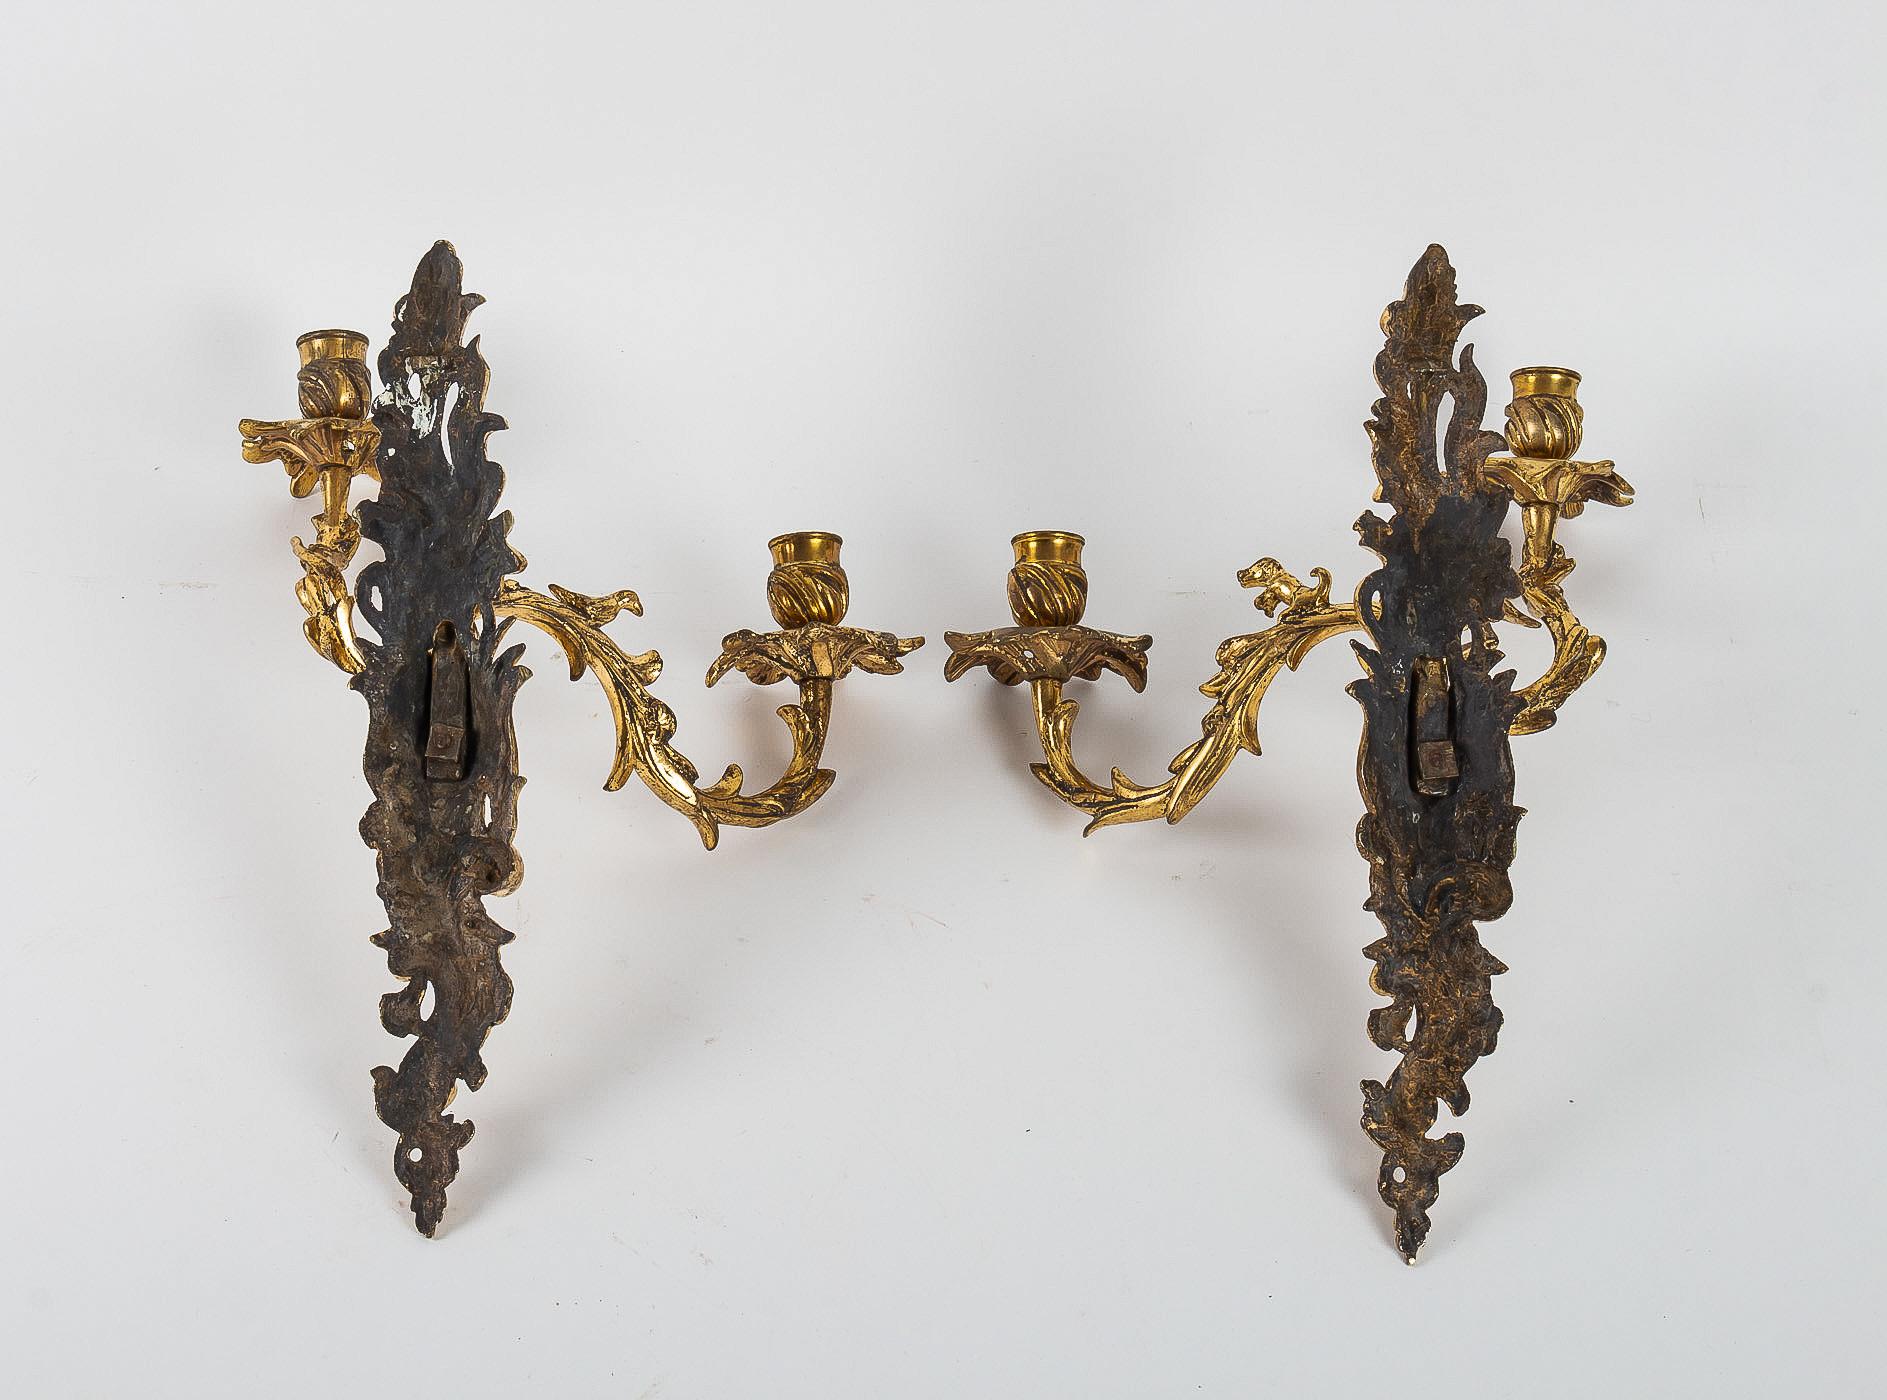 Crowned C Mark, Rare Pair of Hunting Design Ormolu Louis XV Period Sconces For Sale 9